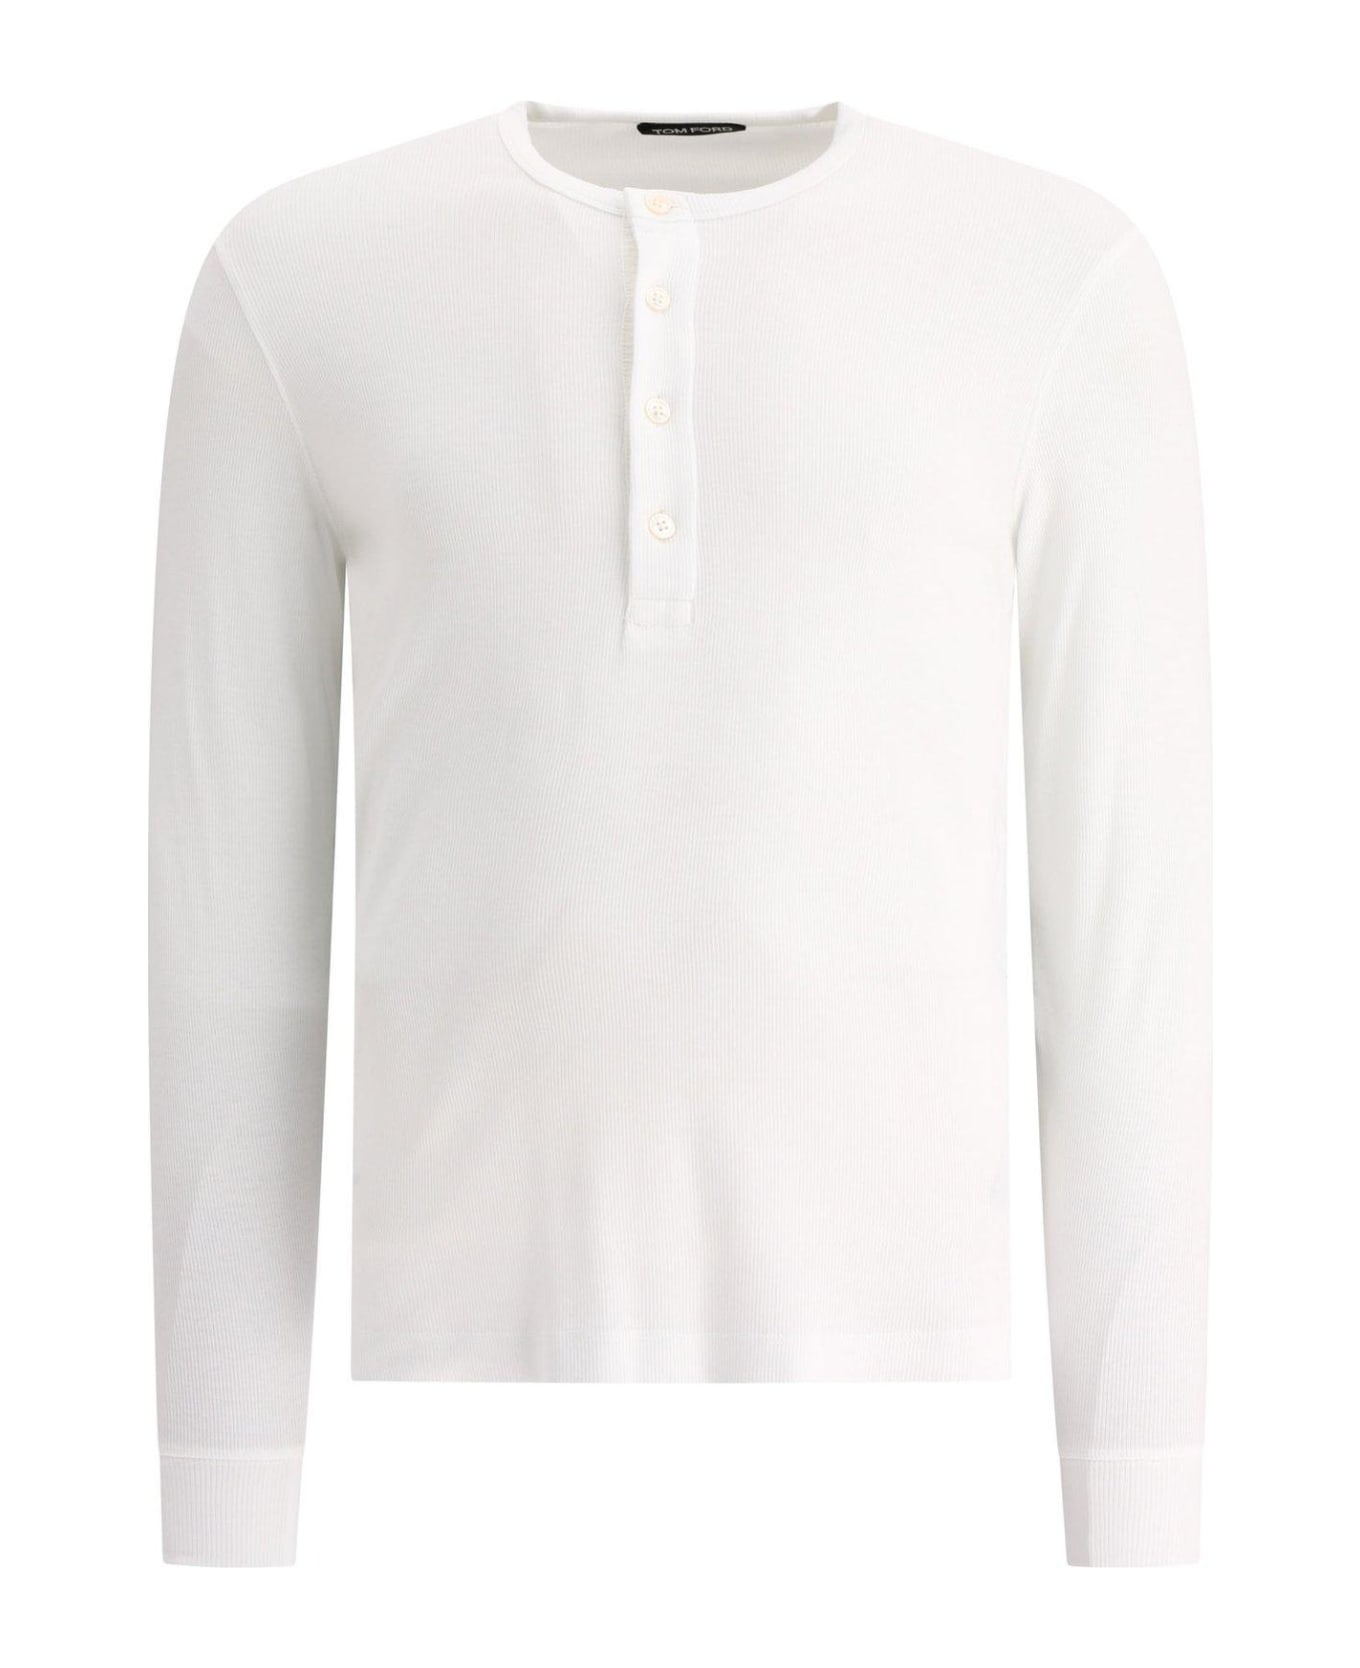 Tom Ford Buttoned Long-sleeved T-shirt - WHITE シャツ